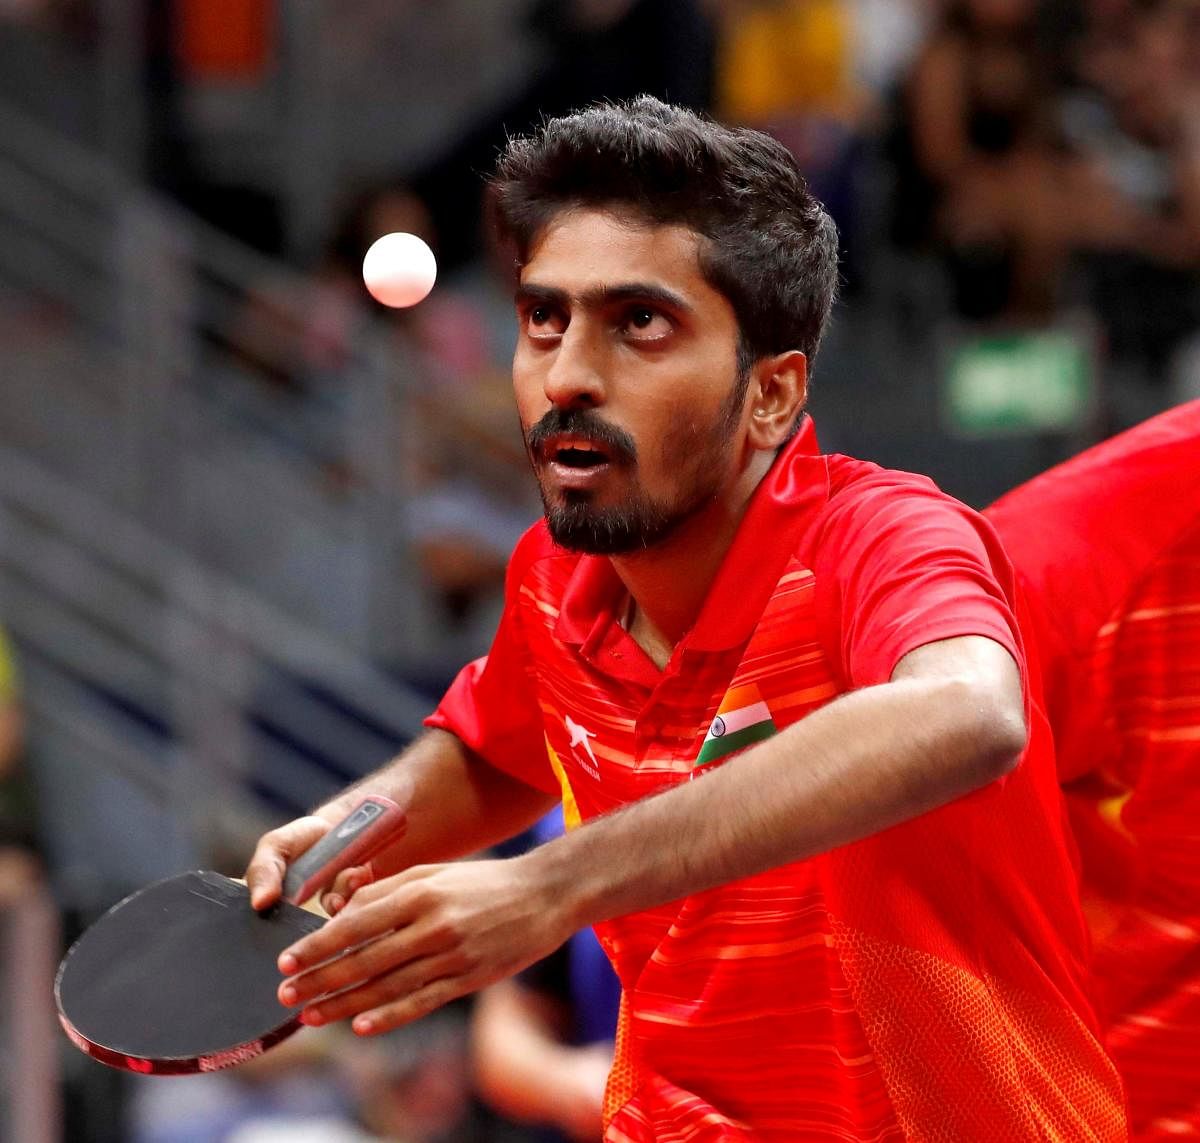 The meteoric rise of Sathiyan